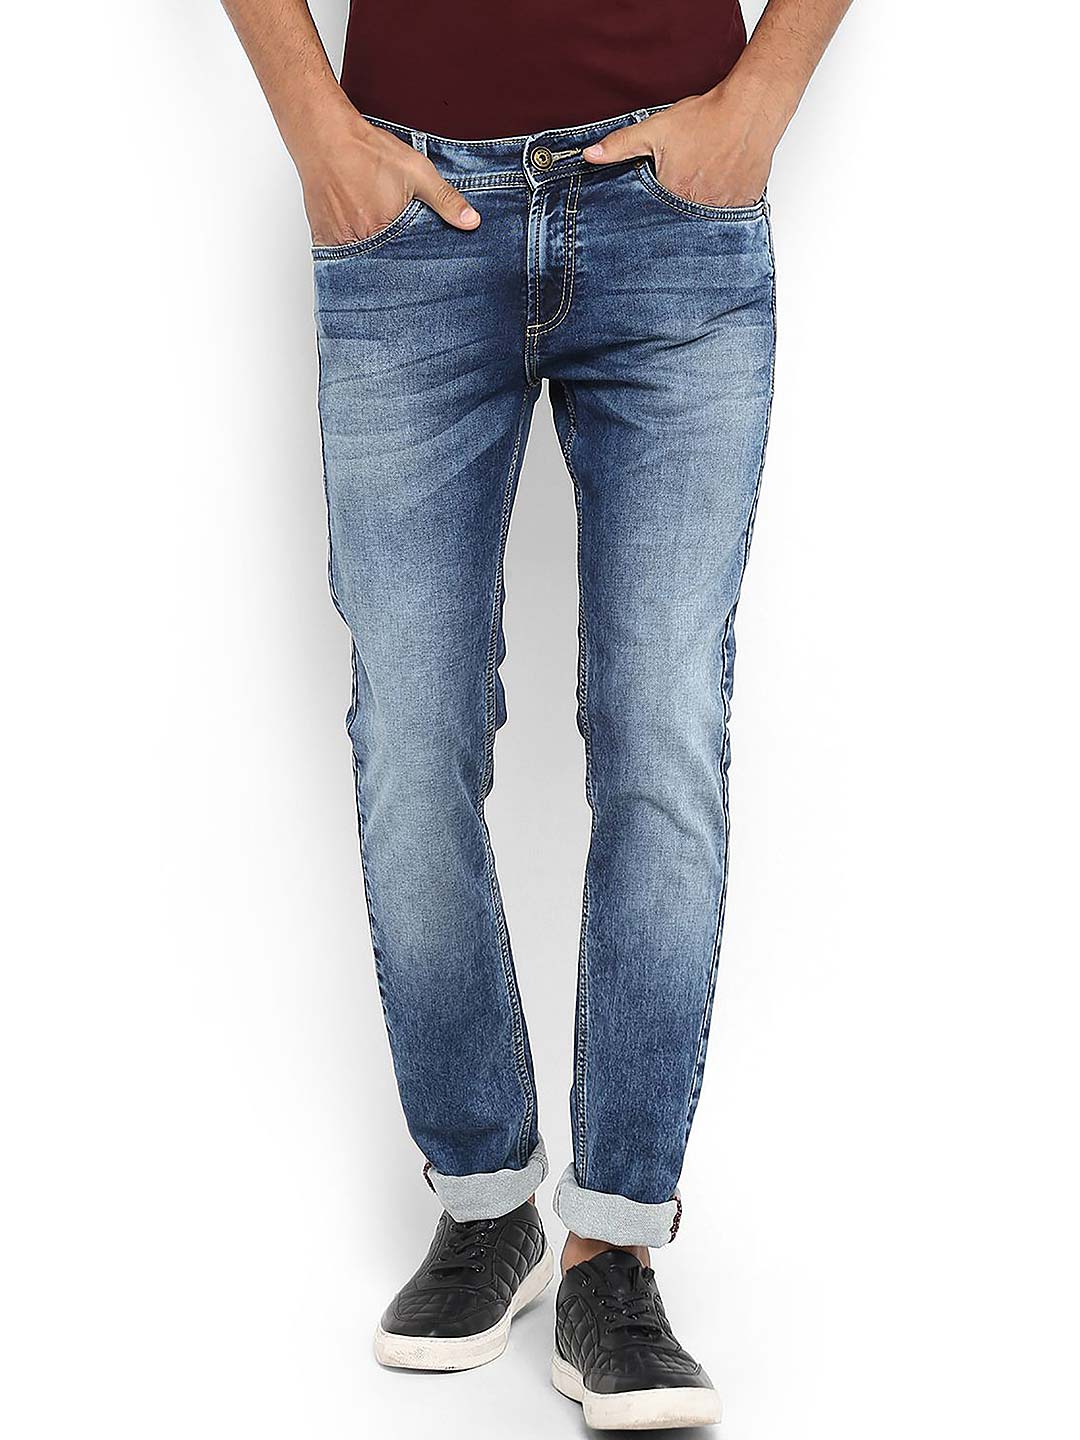 buy mufti jeans online